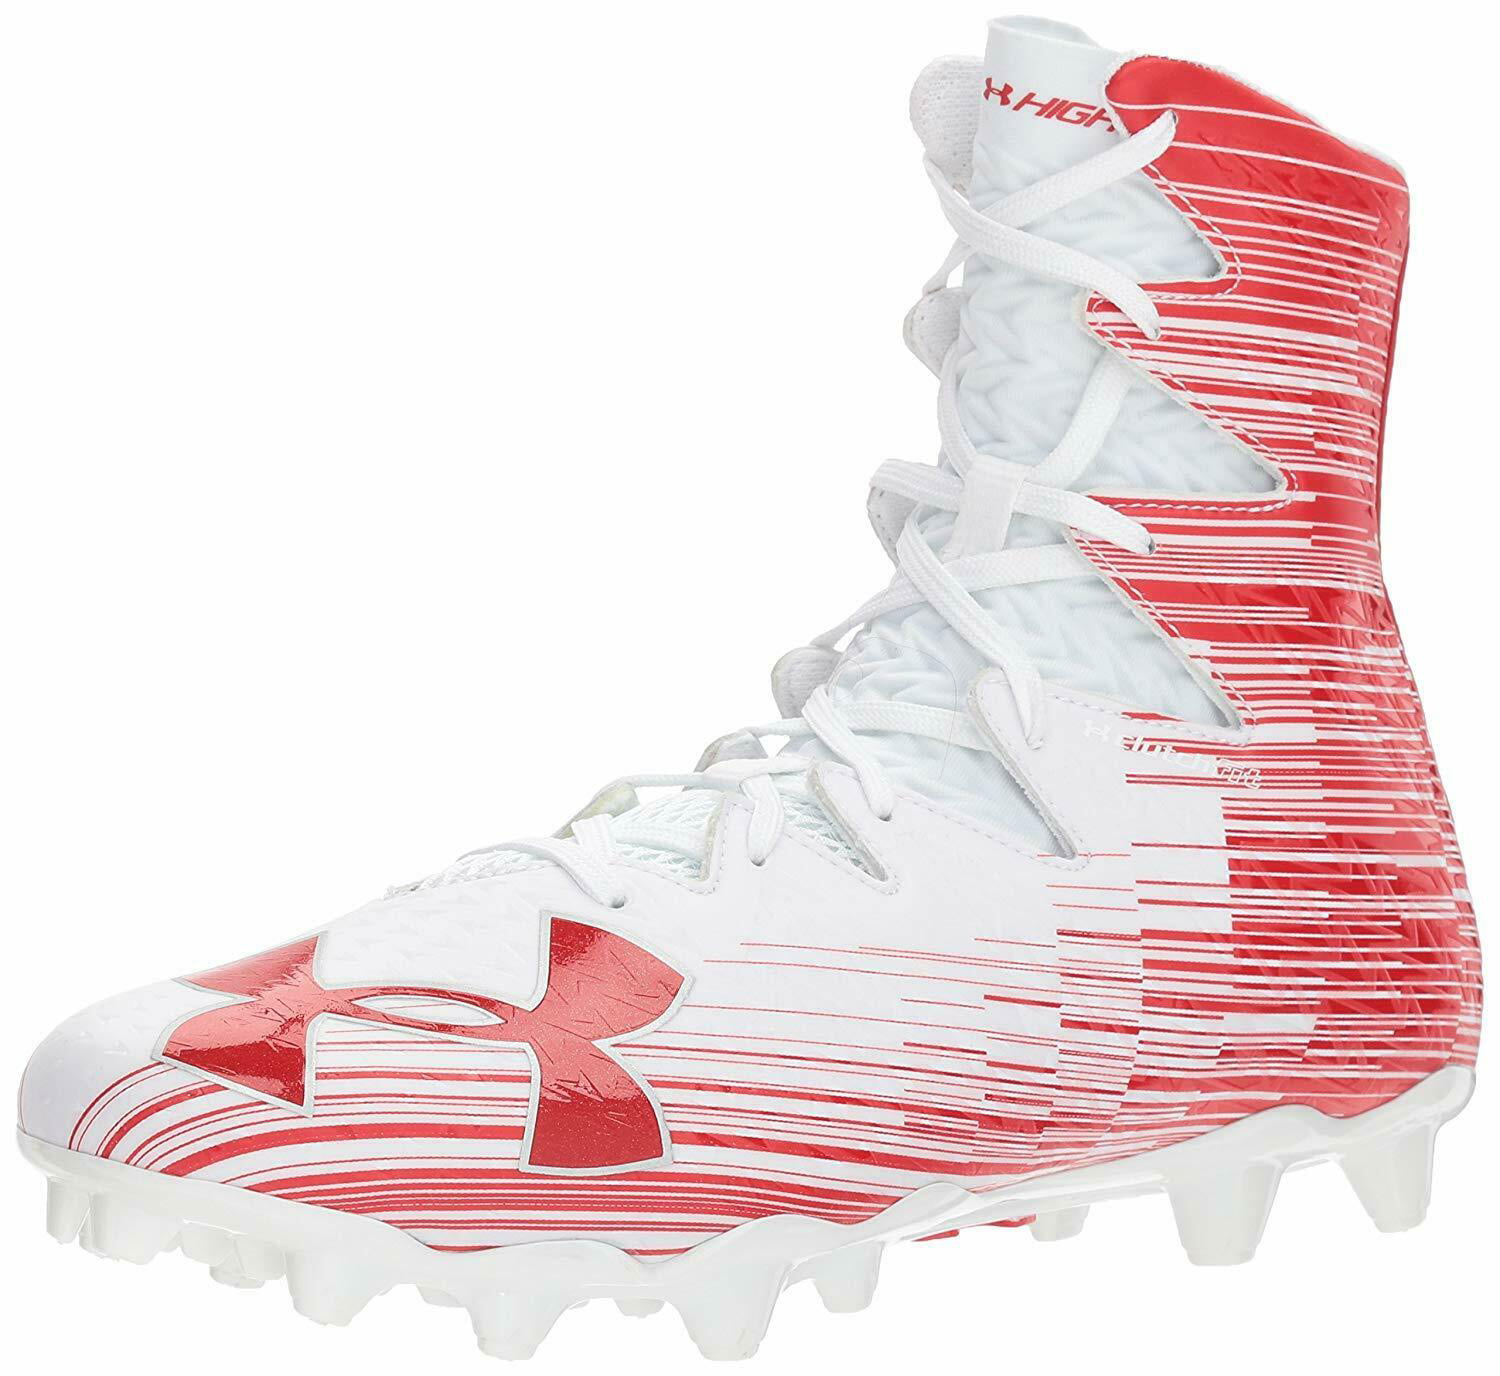 SDL UA Under Armour ICON Highlight MC Football Cleats Red White 3020924-999 NEW 